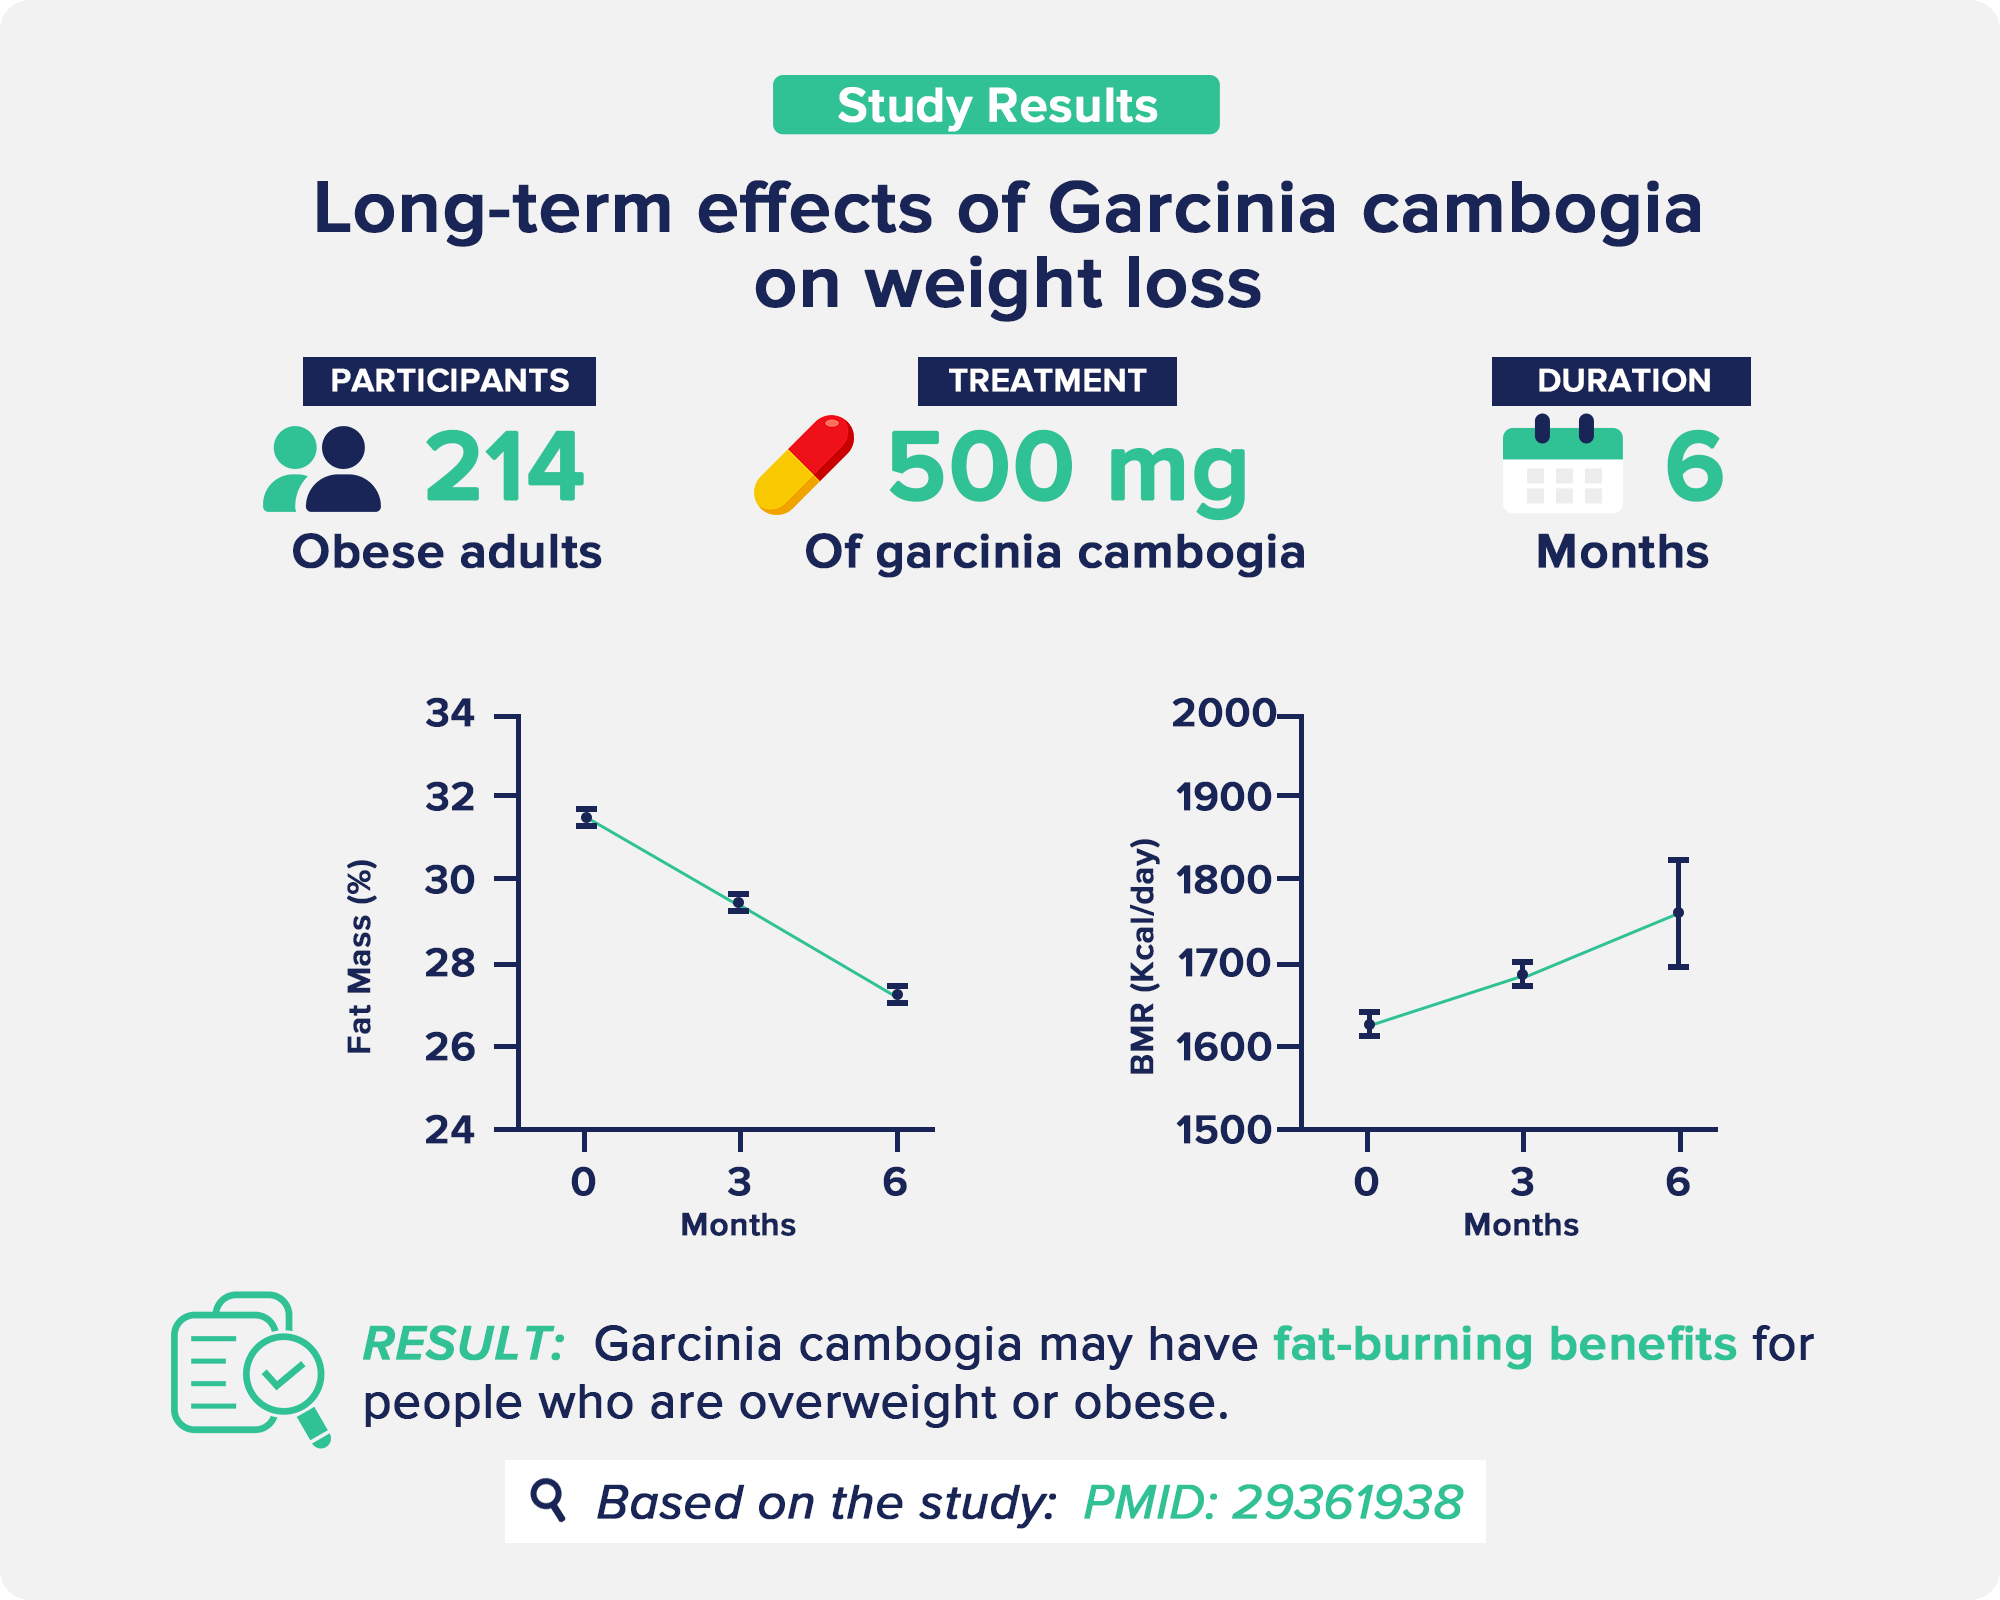 Long-term effects of Garcinia cambogia on weight loss